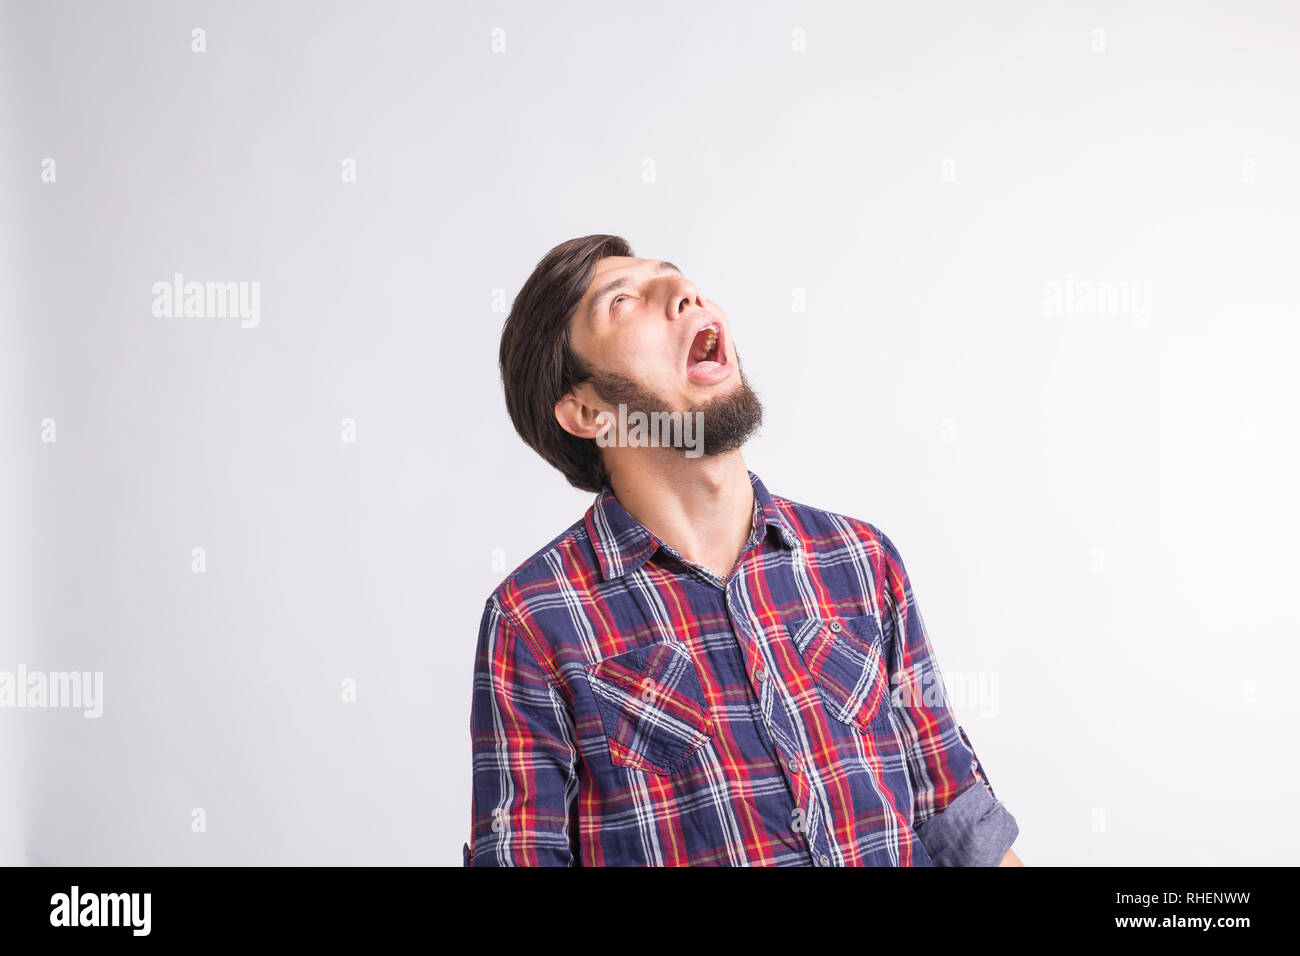 Shocked and surprised face of arab man looking up isolated on white ...